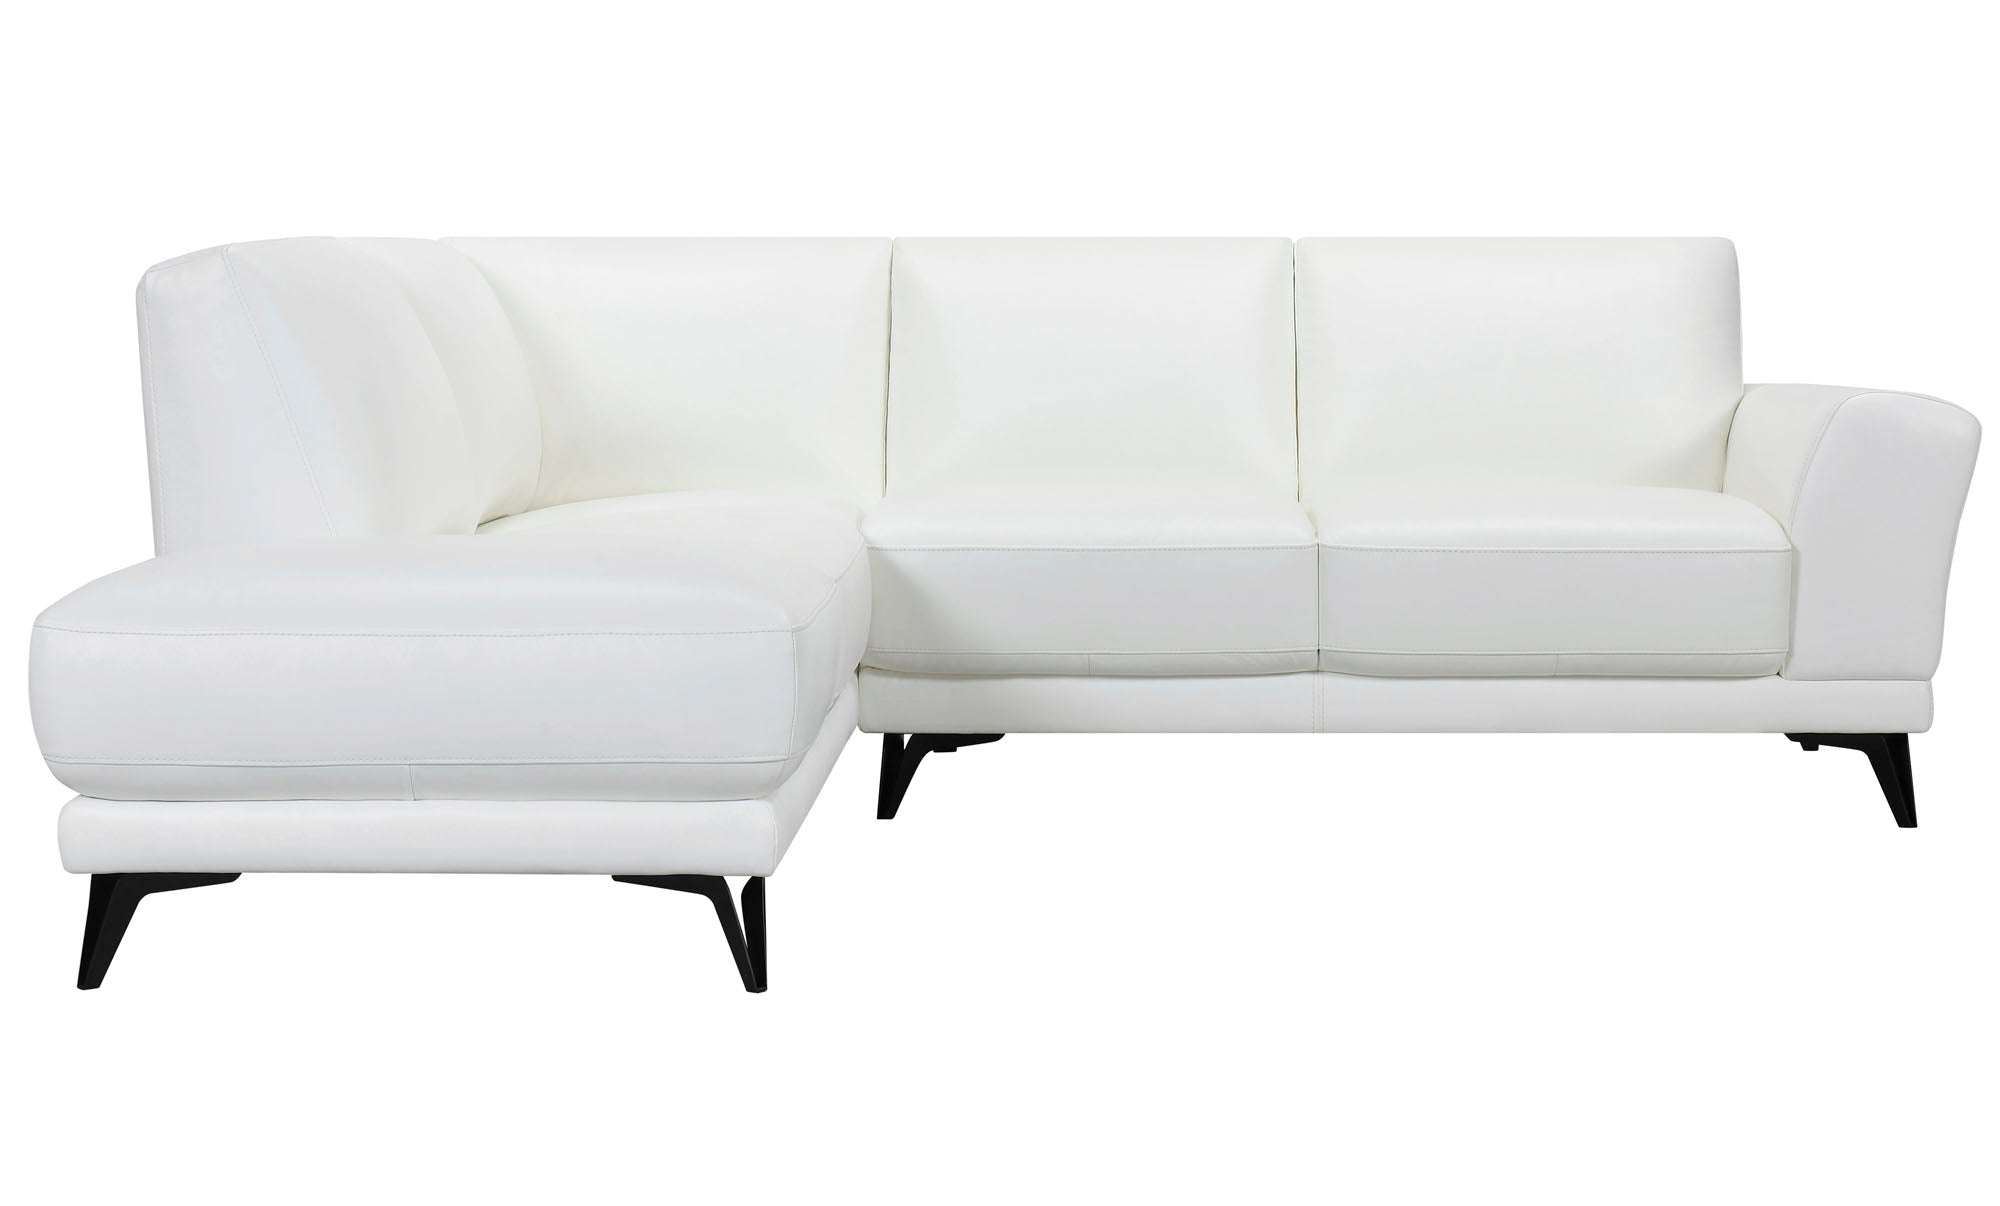 Venice White 2 Piece Leather Sectional